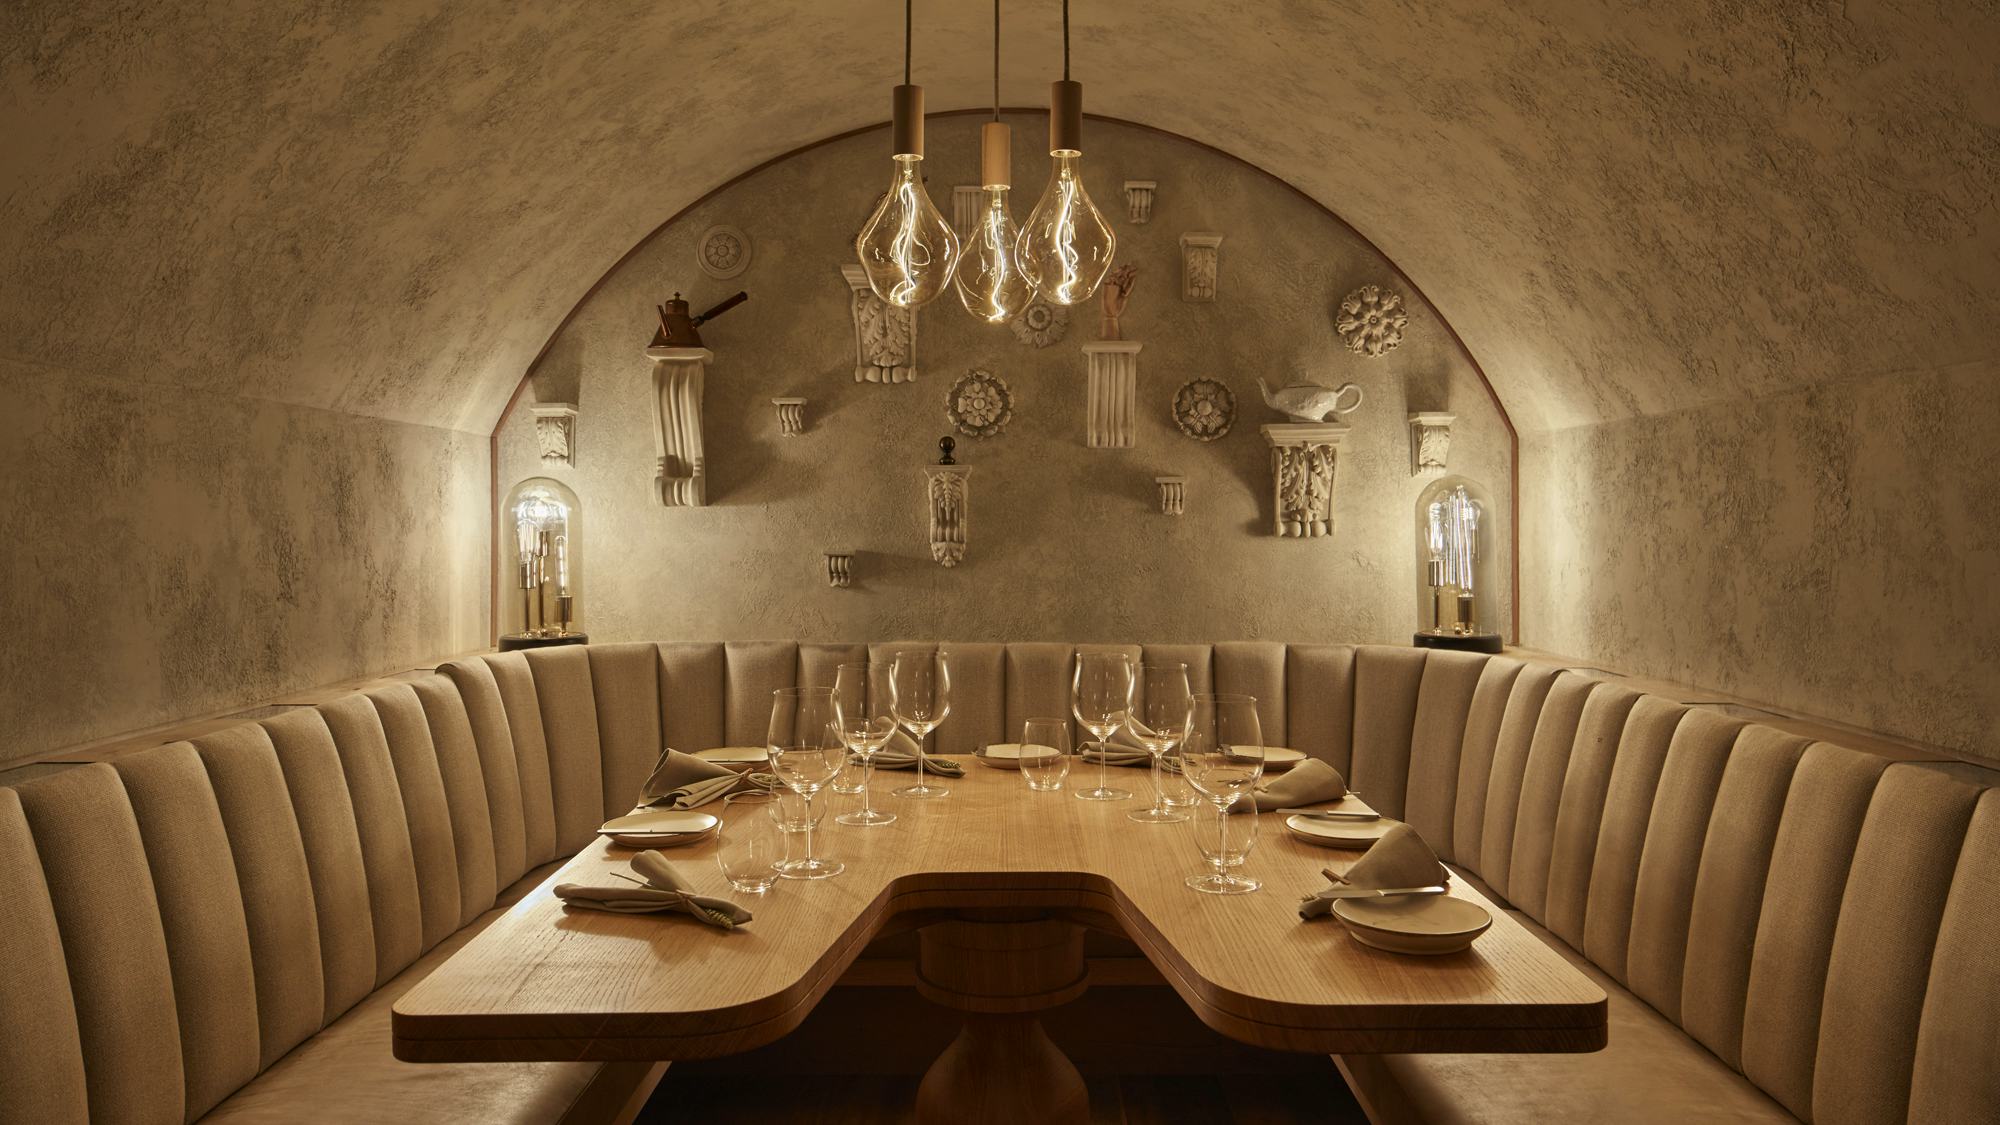 Hide Ollie Dabbous restaurants west end london mayfair private dining rooms shadow room vault interactive dining